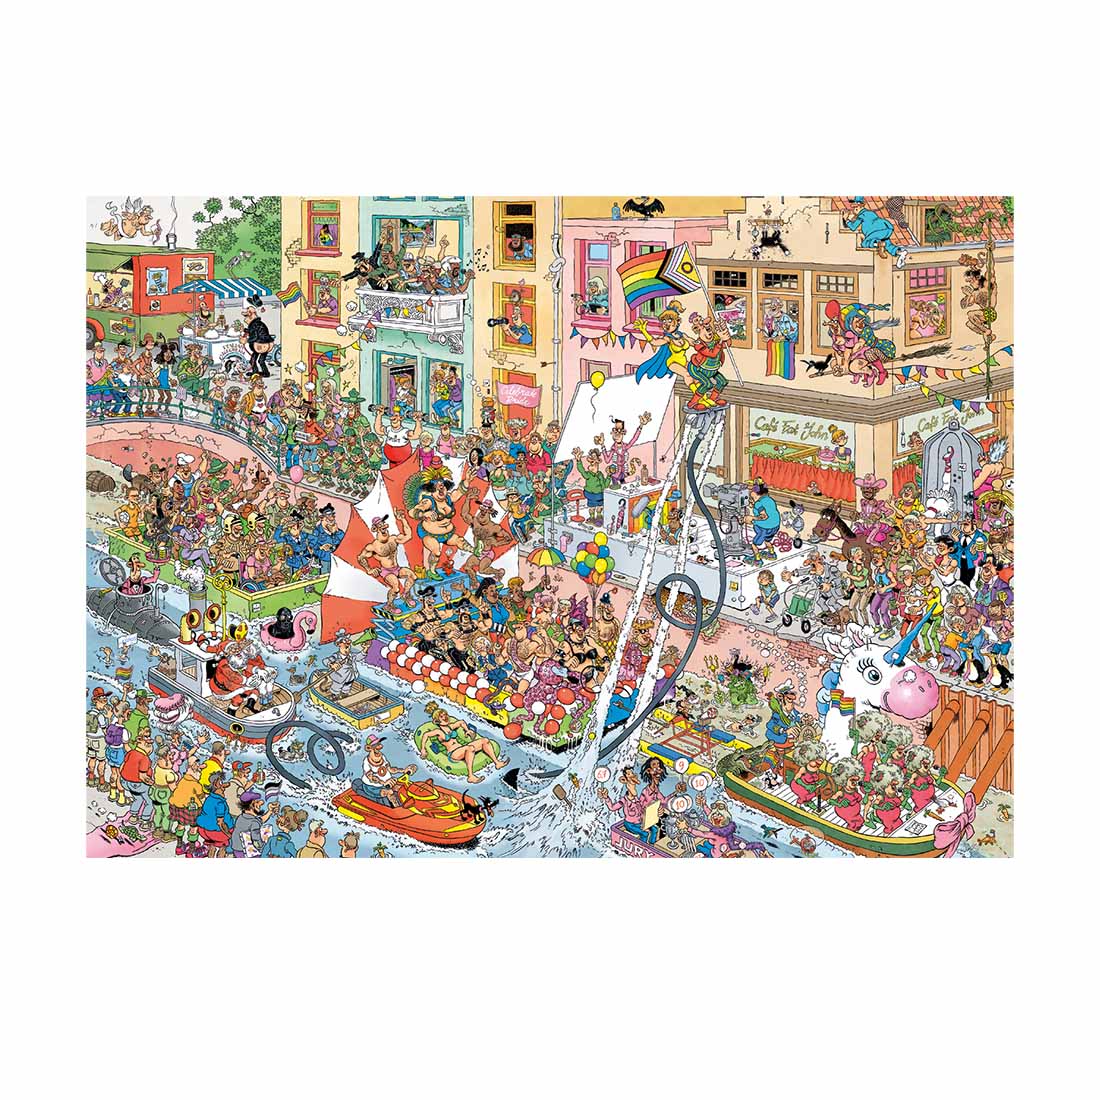 Everyday Heroes Police & Fire Jigsaw Puzzle By Galison